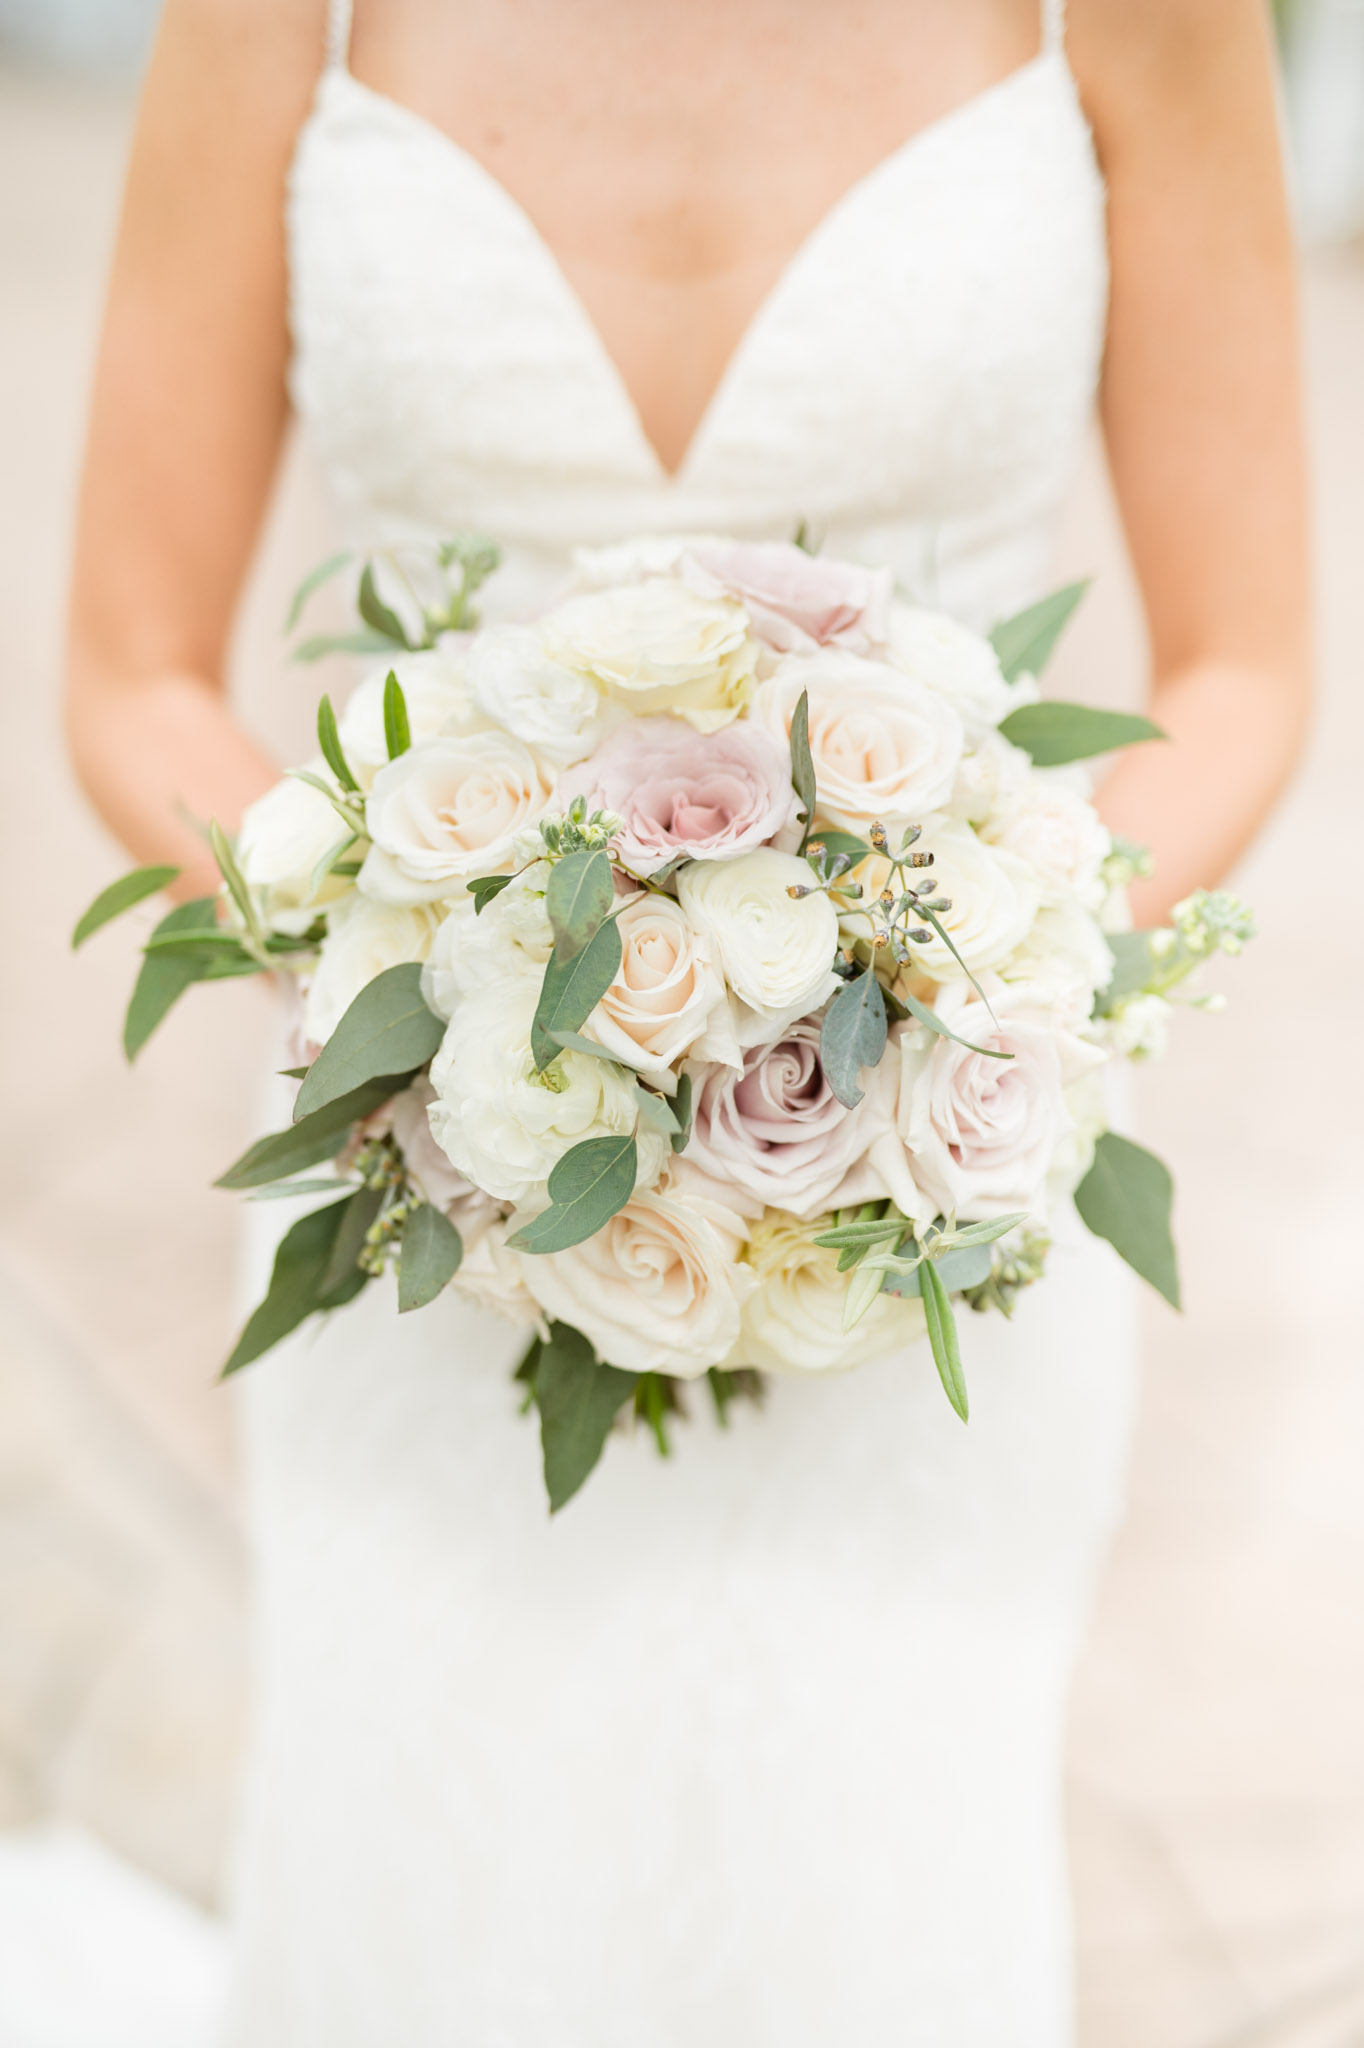 Bride holds white and cream roses.